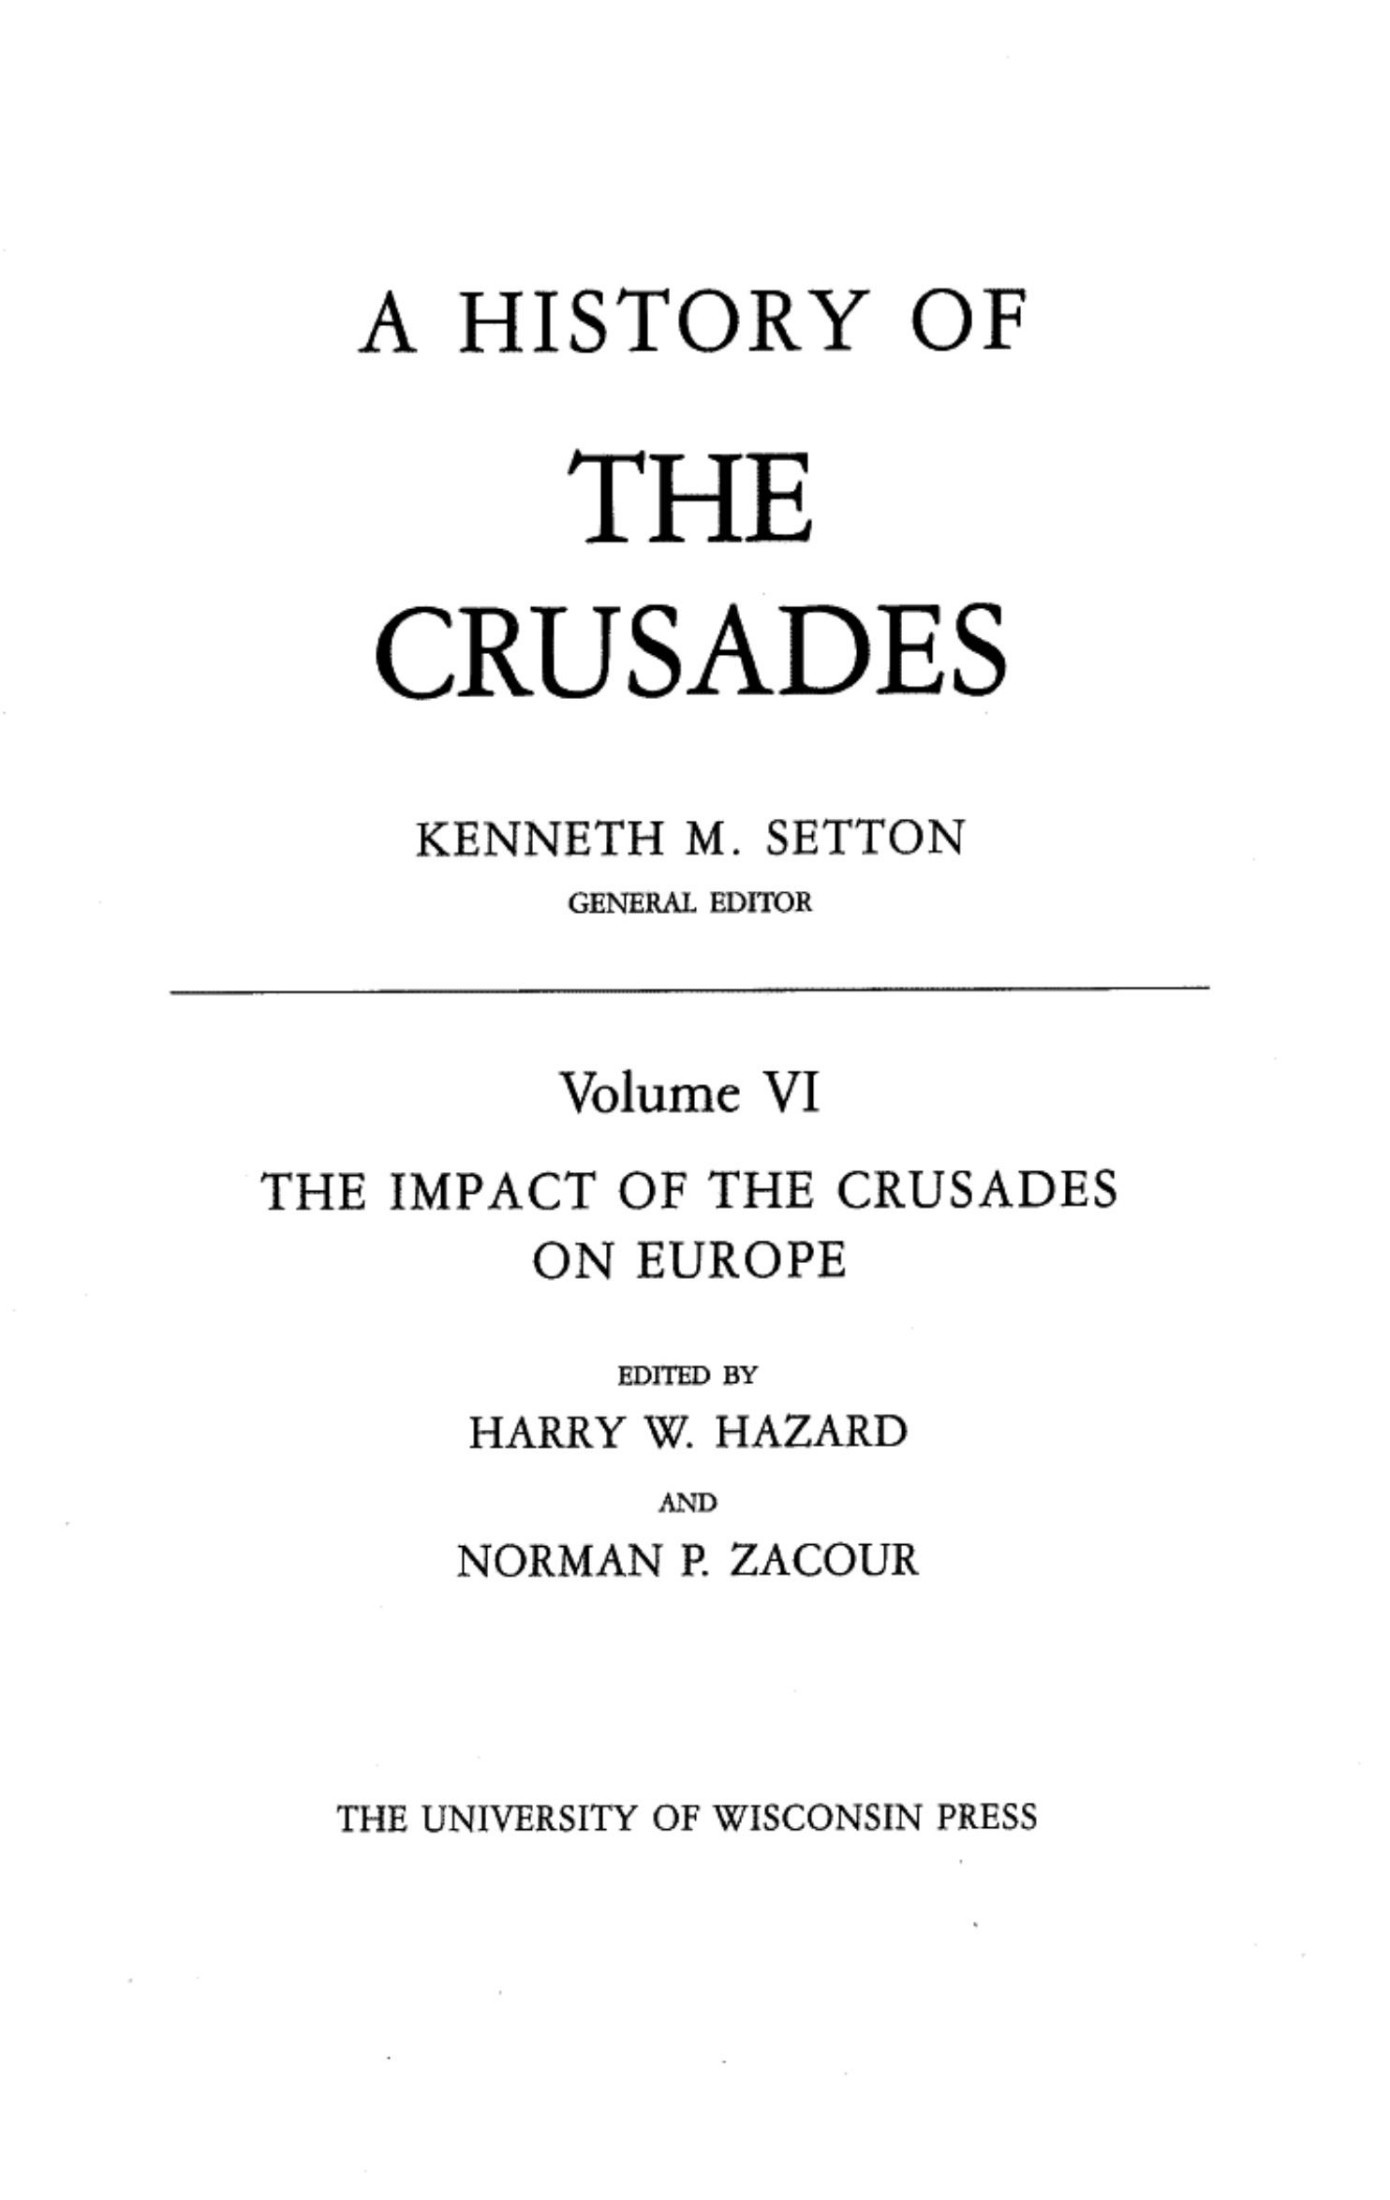 A History of the Crusades, Vol. IV The Impact of the Crusades on Europe